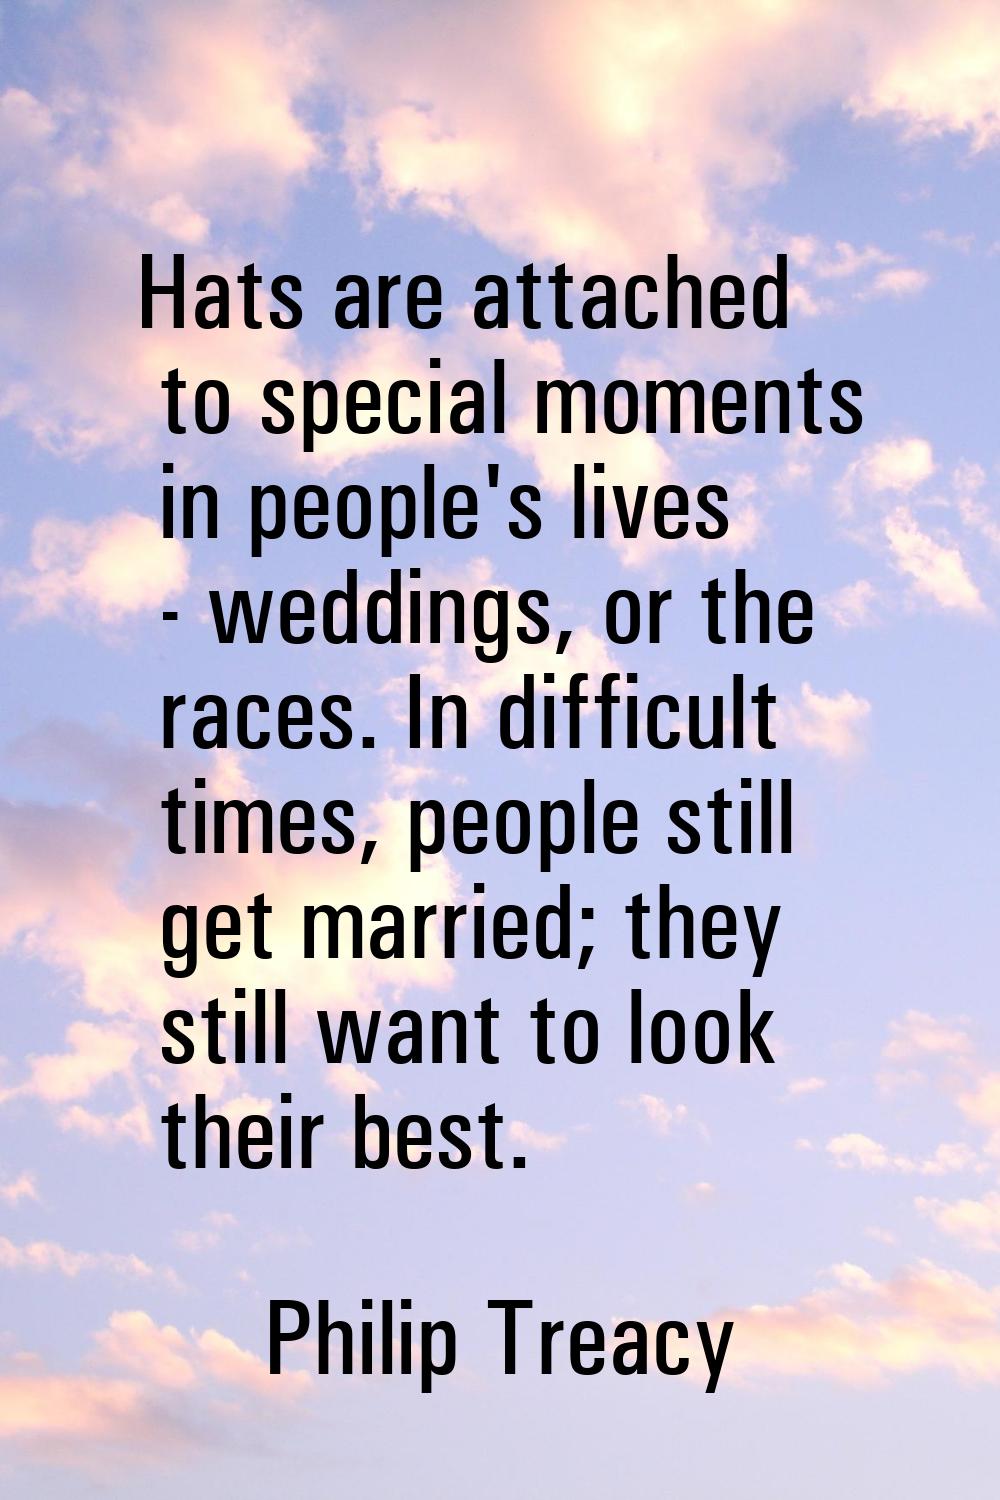 Hats are attached to special moments in people's lives - weddings, or the races. In difficult times